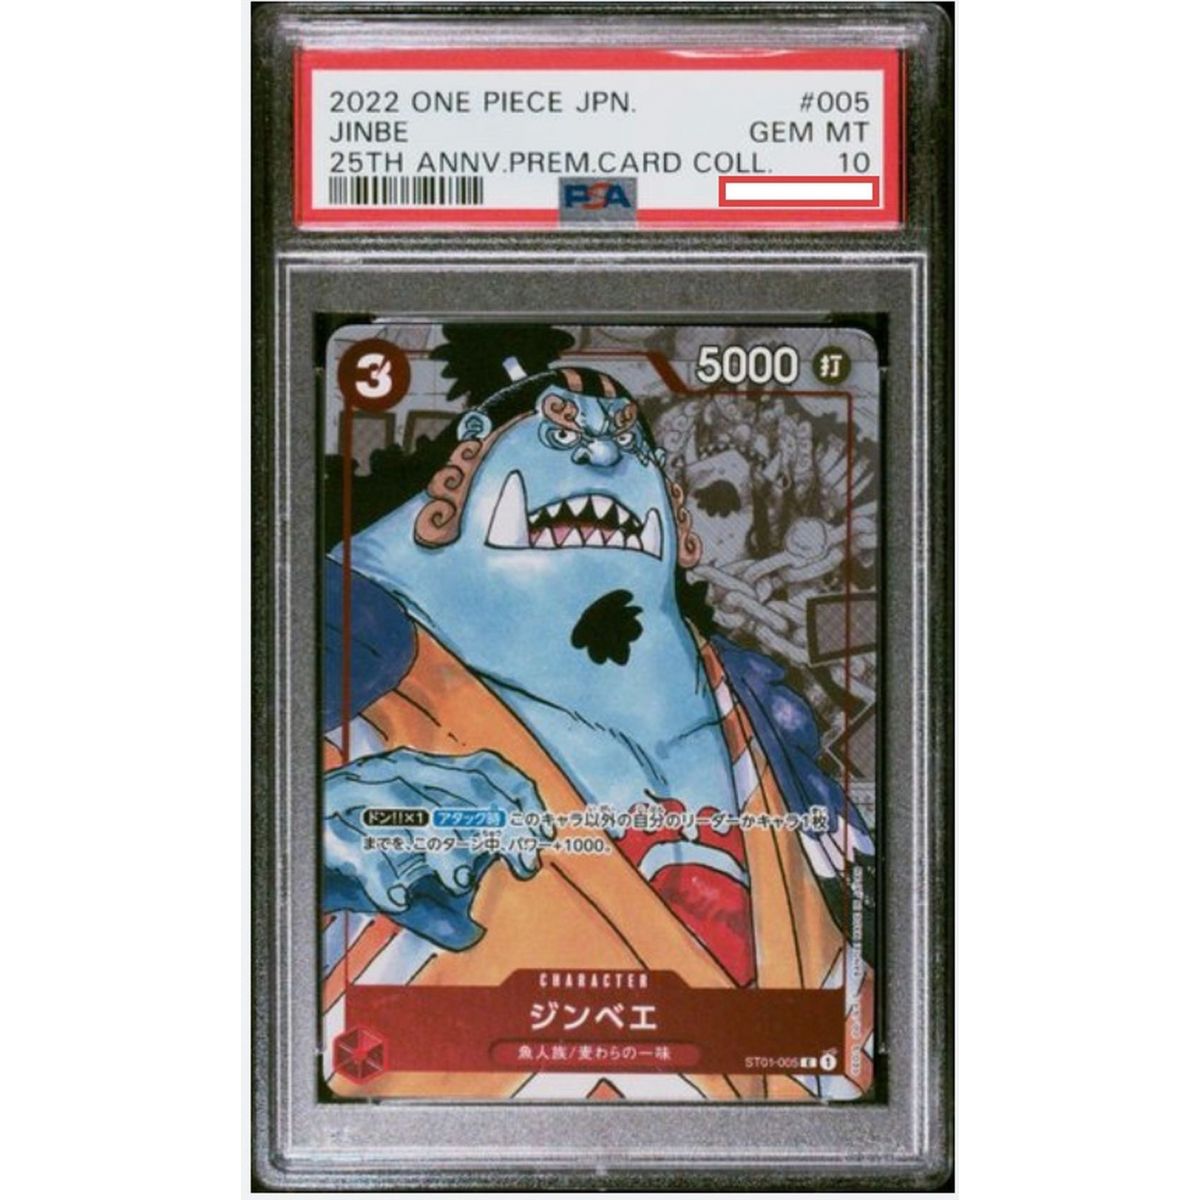 One Piece TCG - One Piece - Promo - Franky - ST01-010 - 25th Anniversary  Premium Card Collection - Graded PSA 10 - JP - Fantasy Sphere